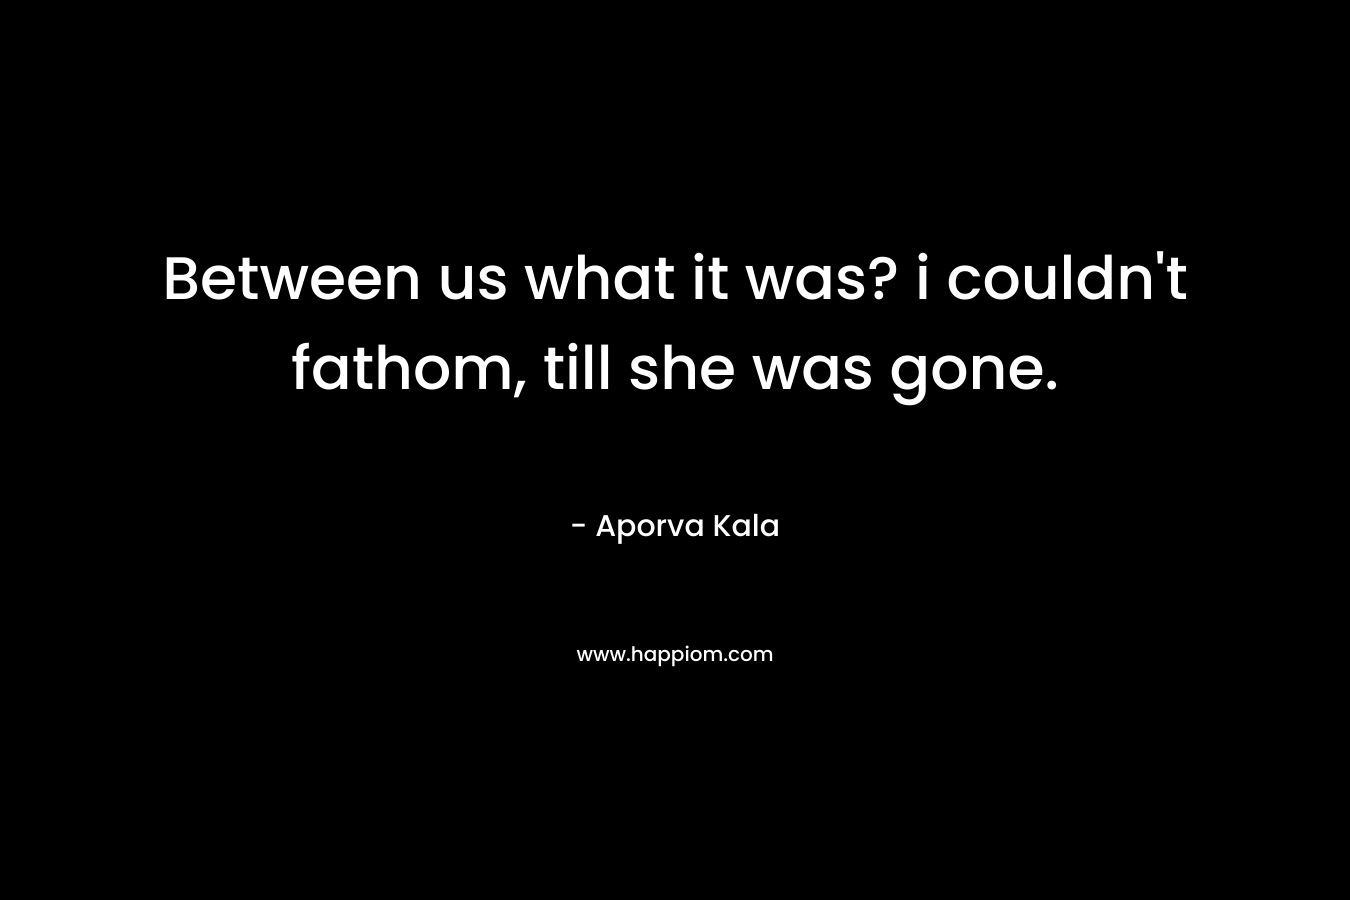 Between us what it was? i couldn’t fathom, till she was gone. – Aporva Kala